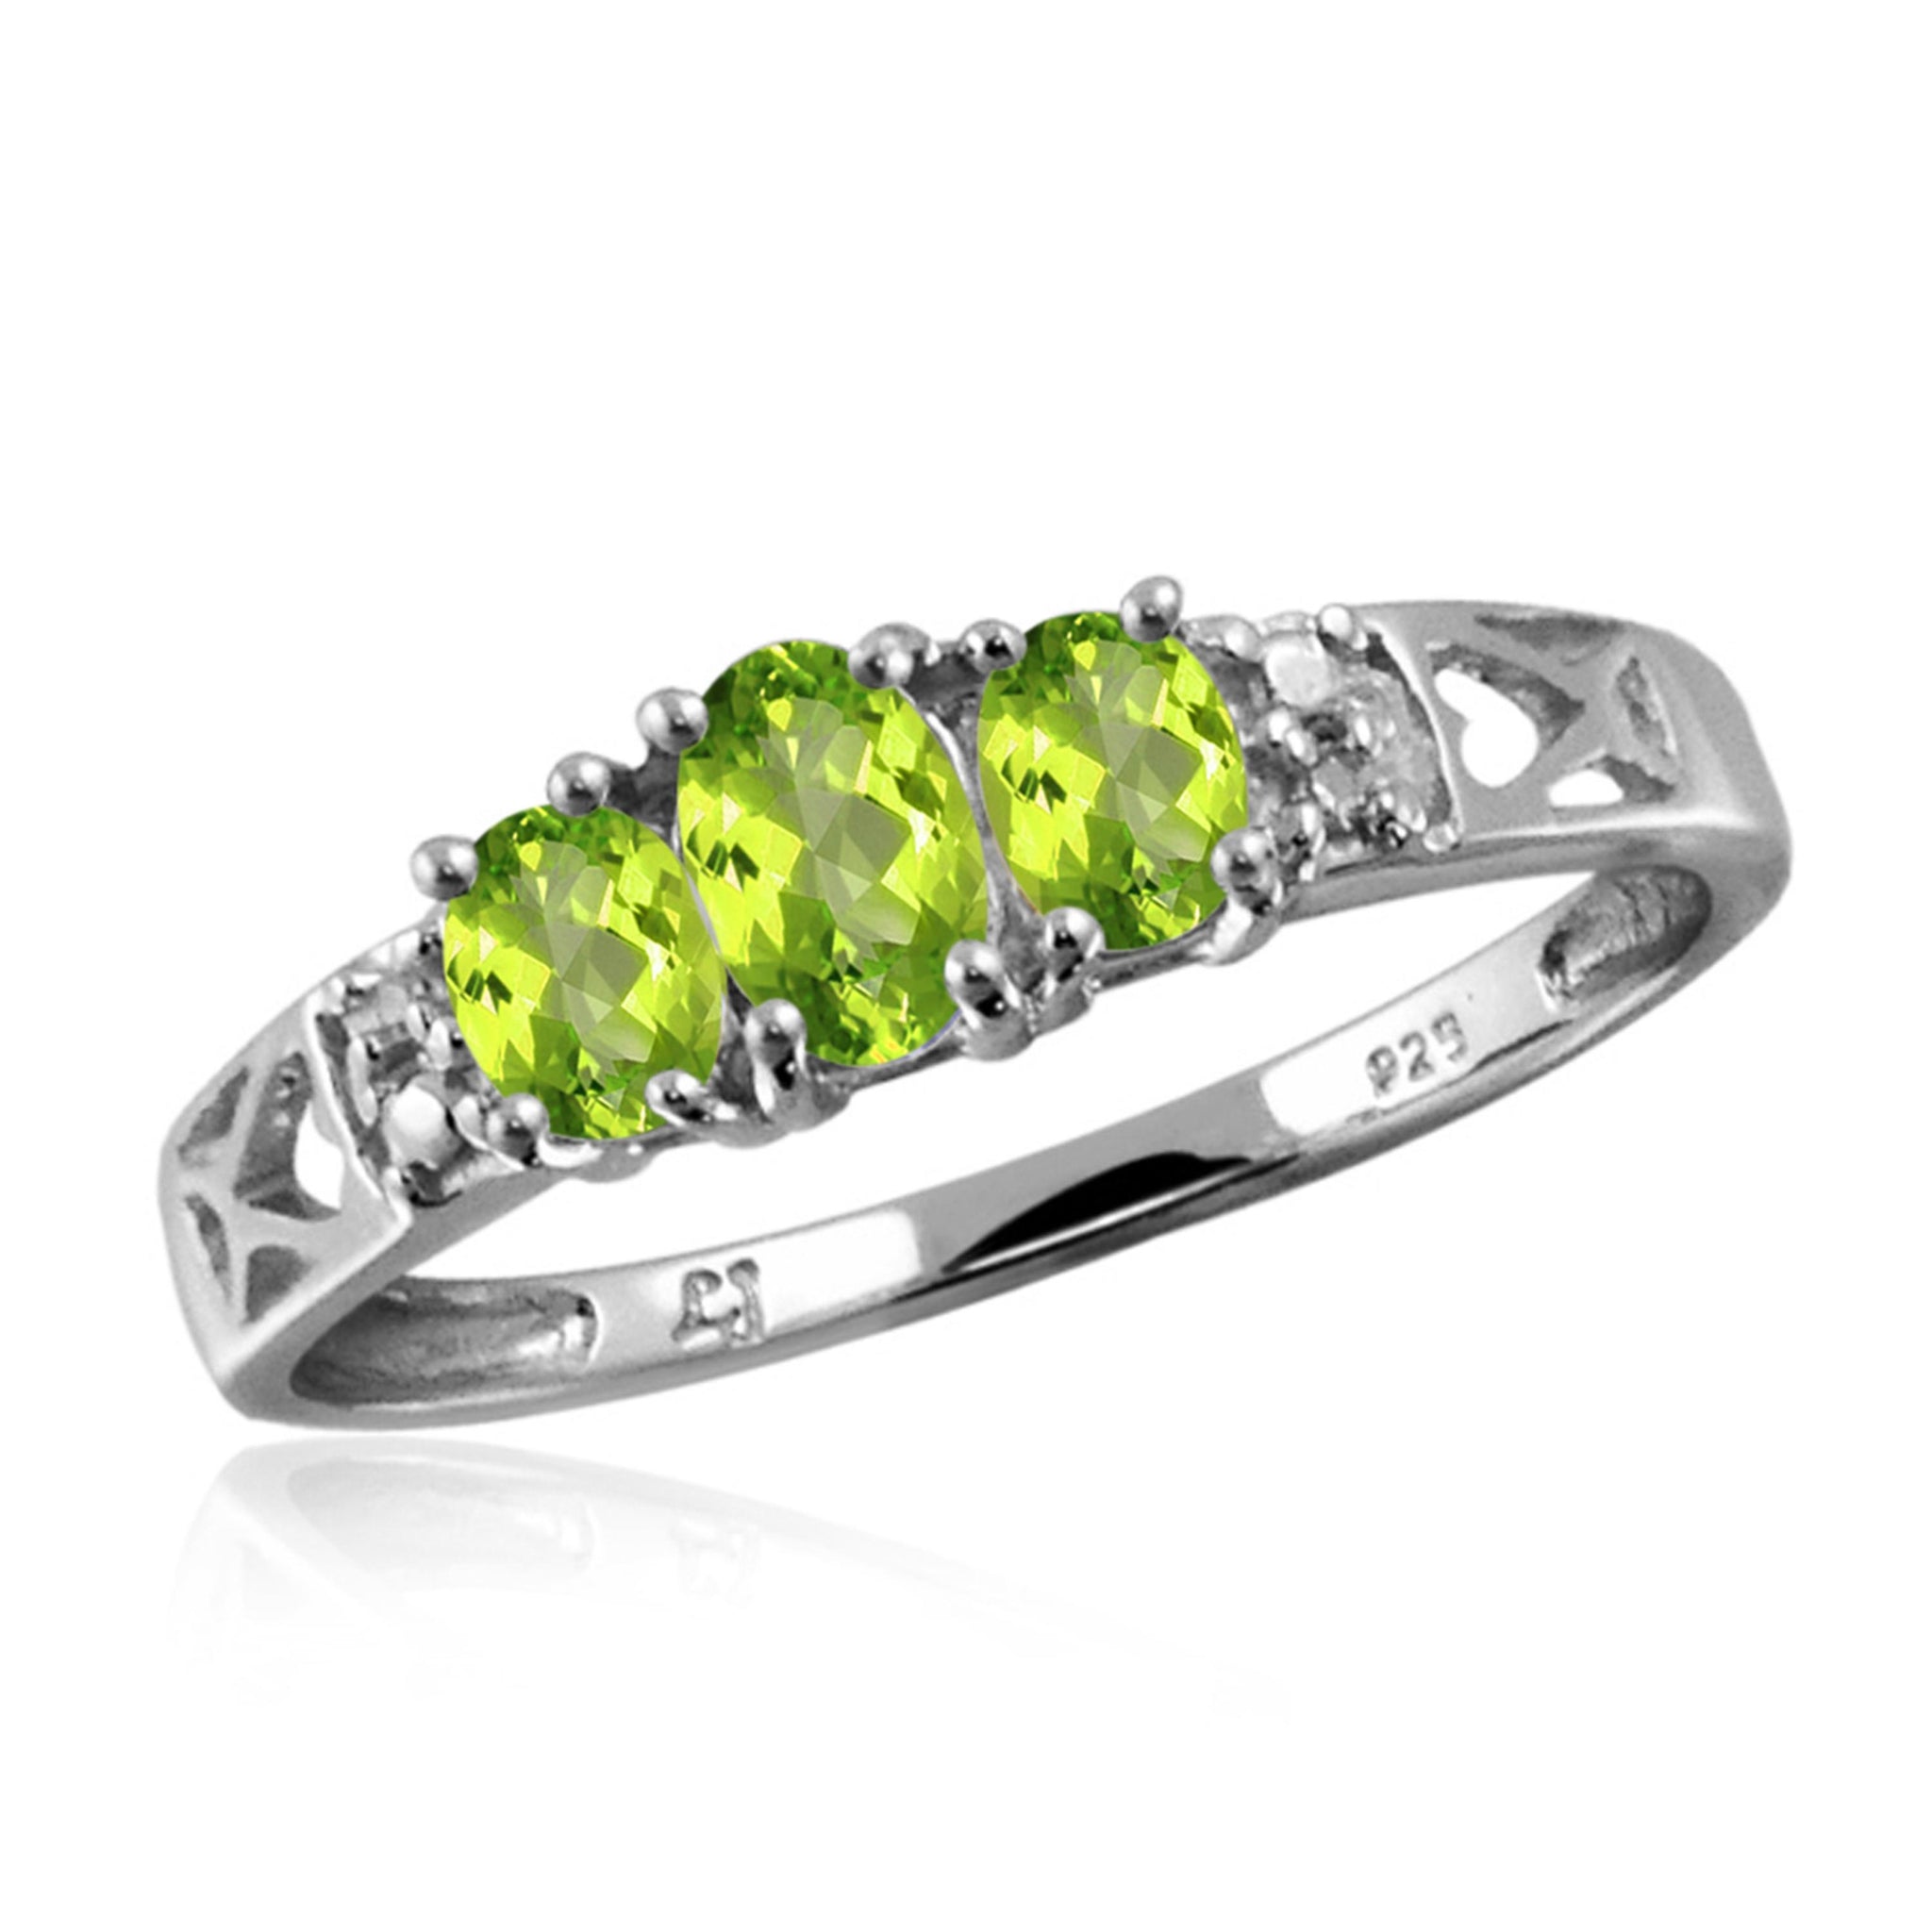 JewelonFire 1/2 Carat T.G.W. Peridot And White Diamond Accent Sterling Silver Ring